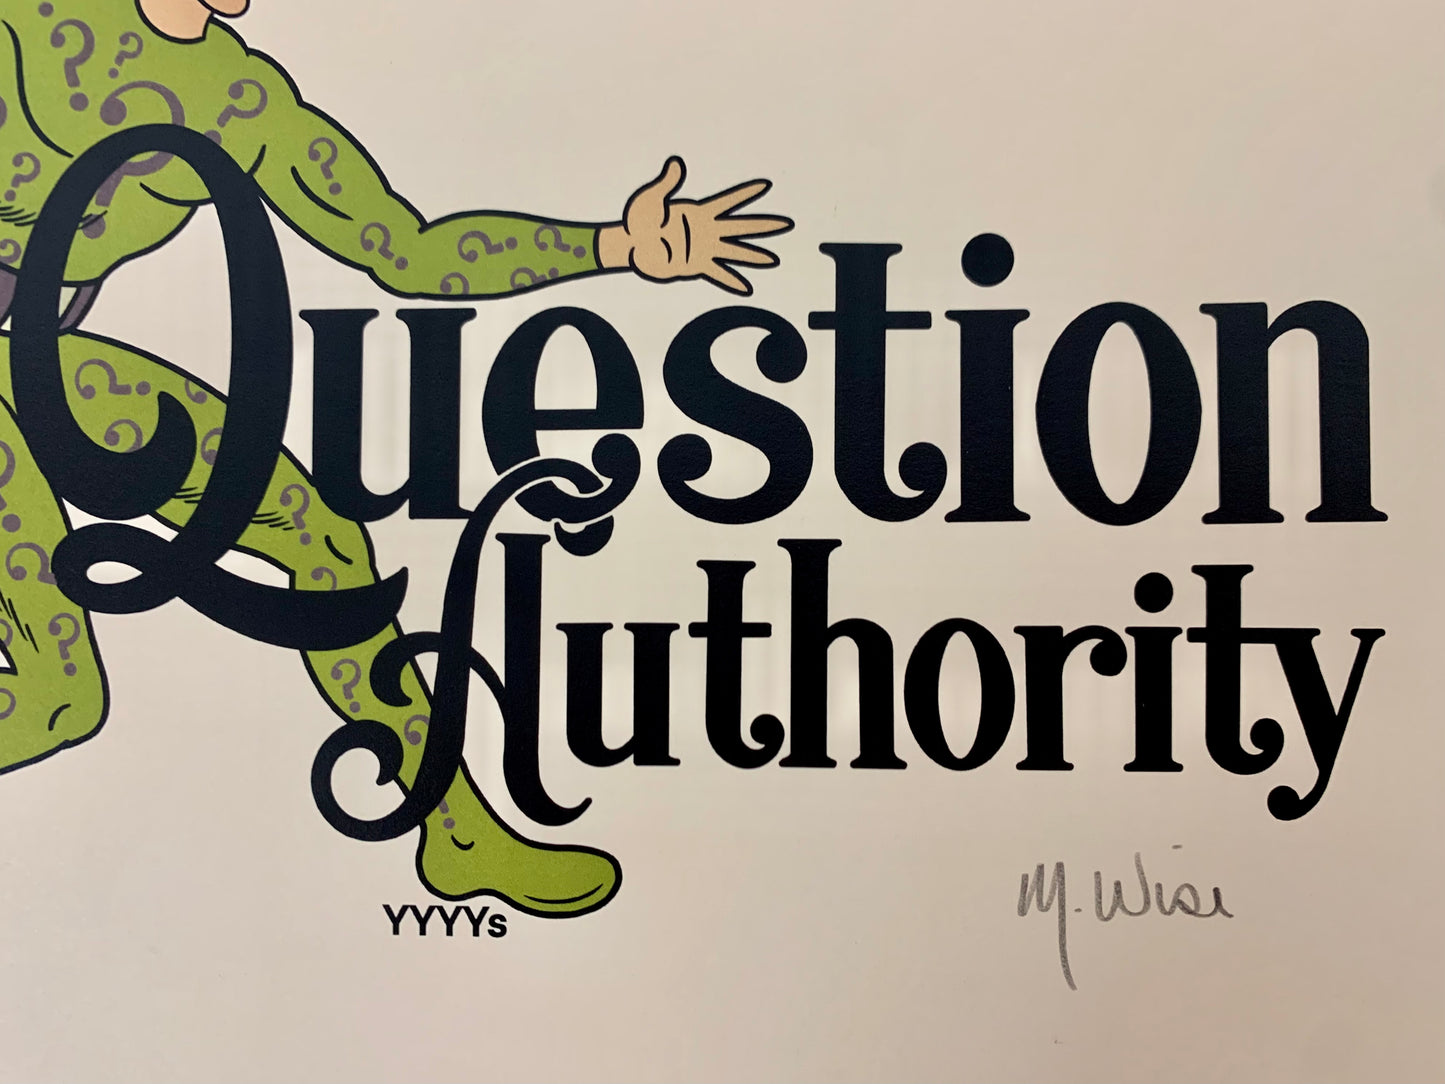 Question Authority Print